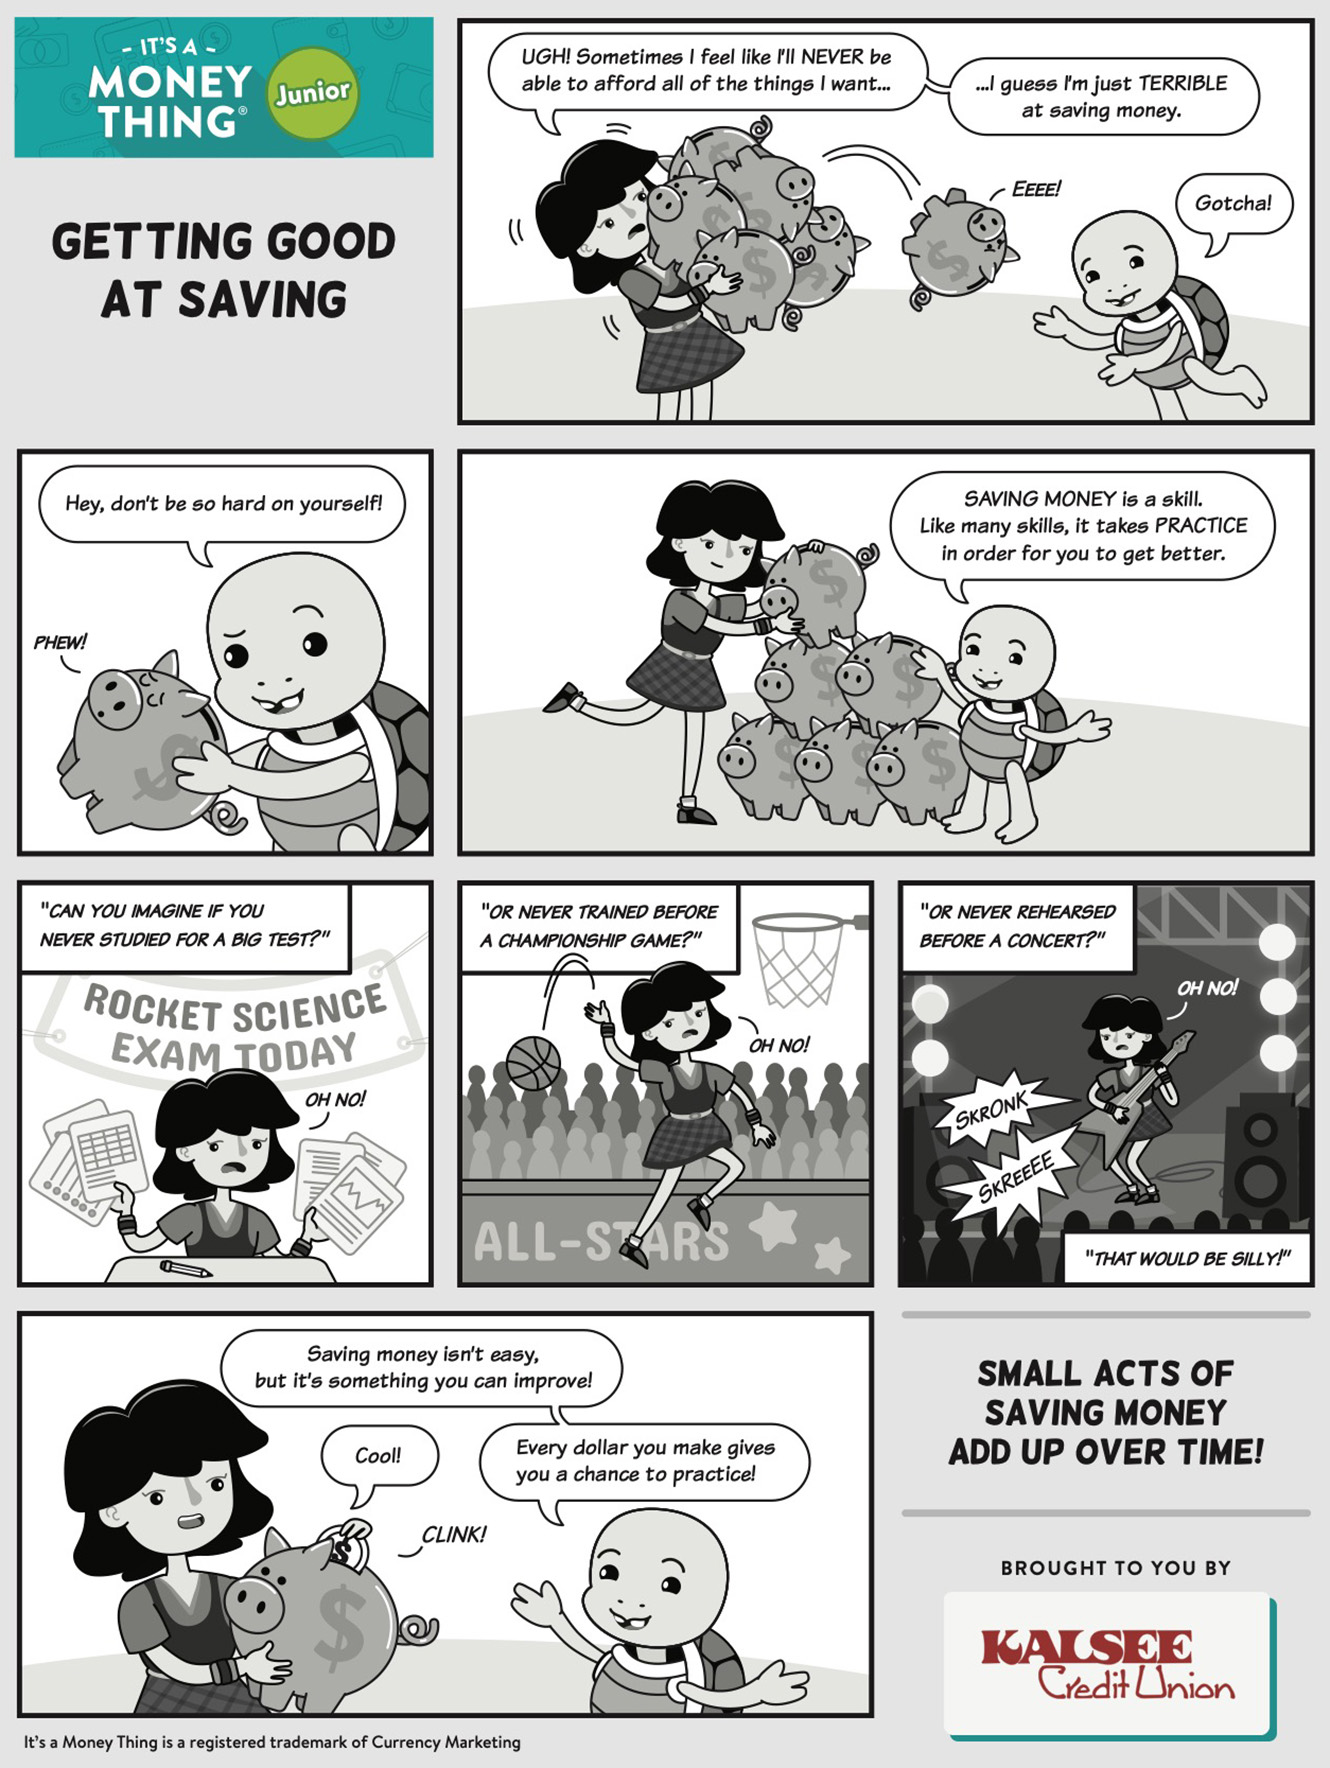 It's a Money Thing Saving Money Comic, click for transcription